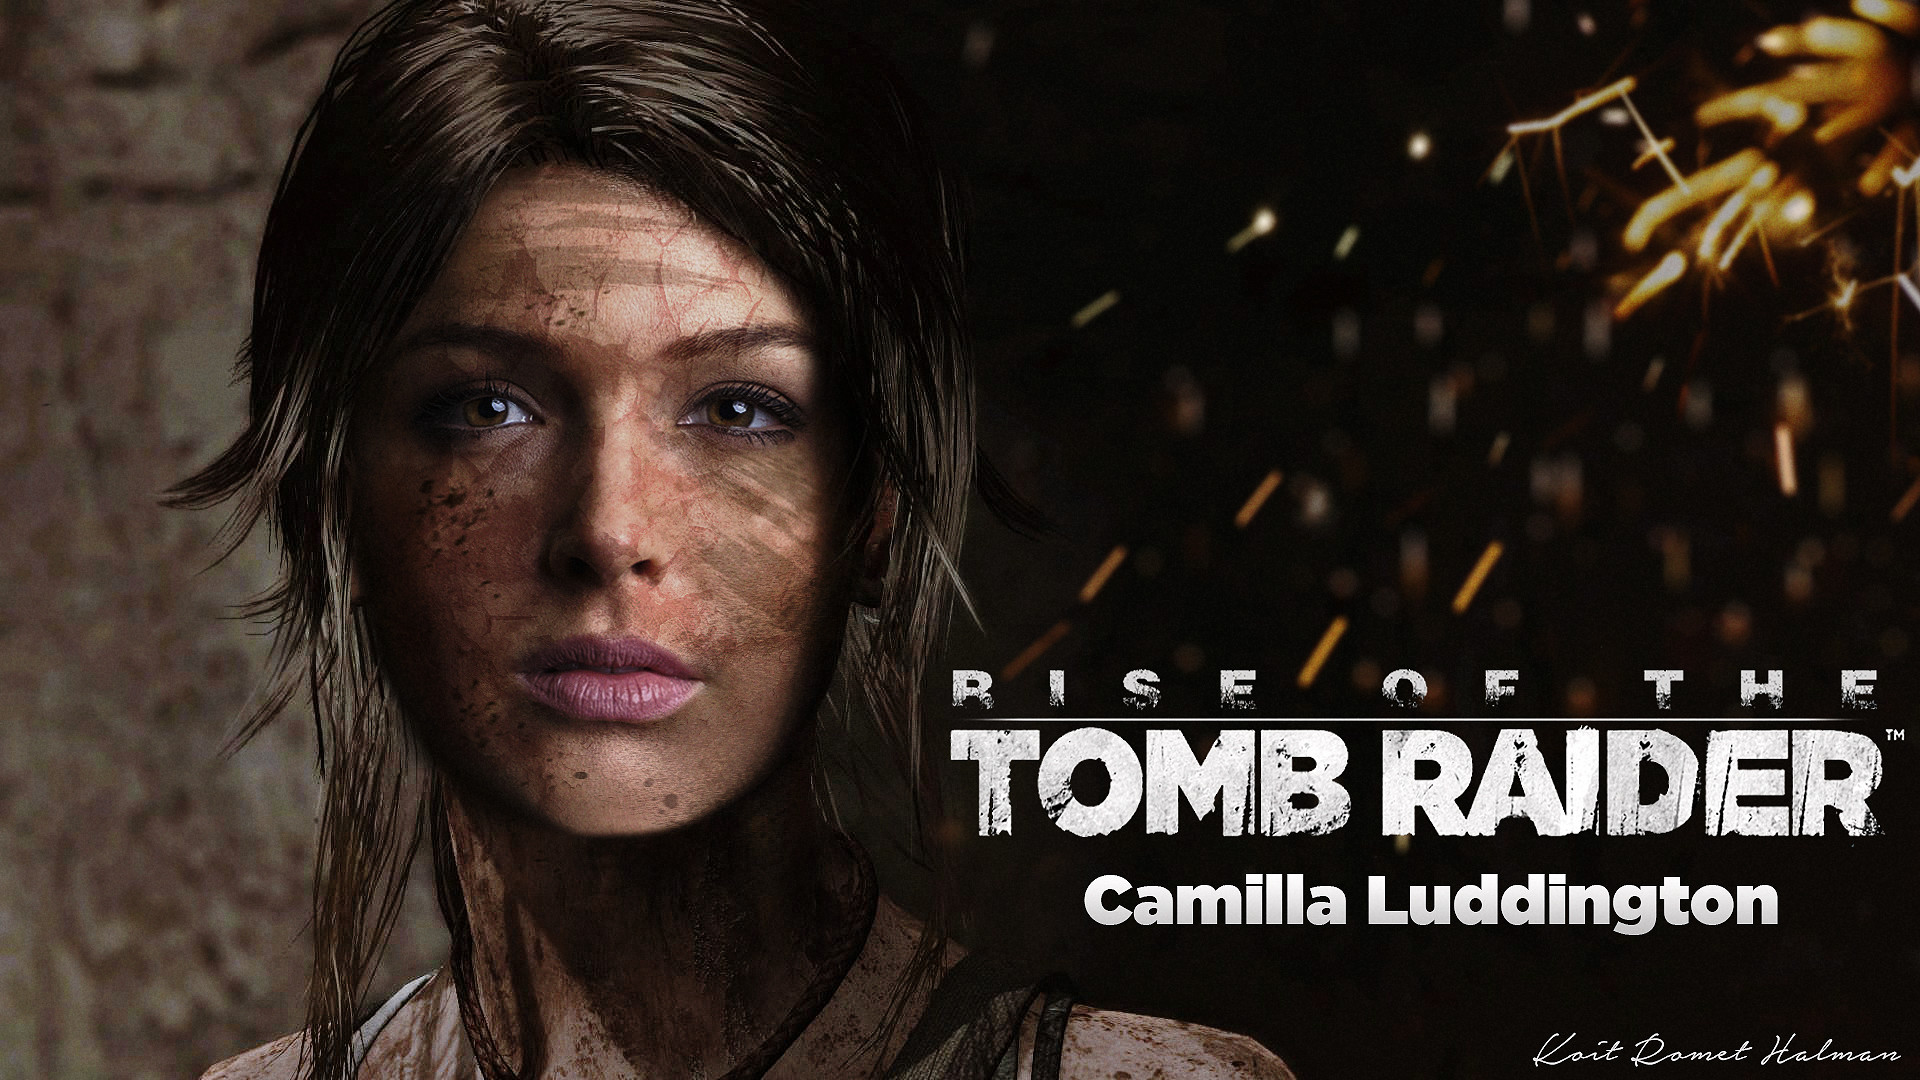 1920x1080 Casting Call: Tomb Raider [Archive] - Page 9 - www.tombraiderforums.com